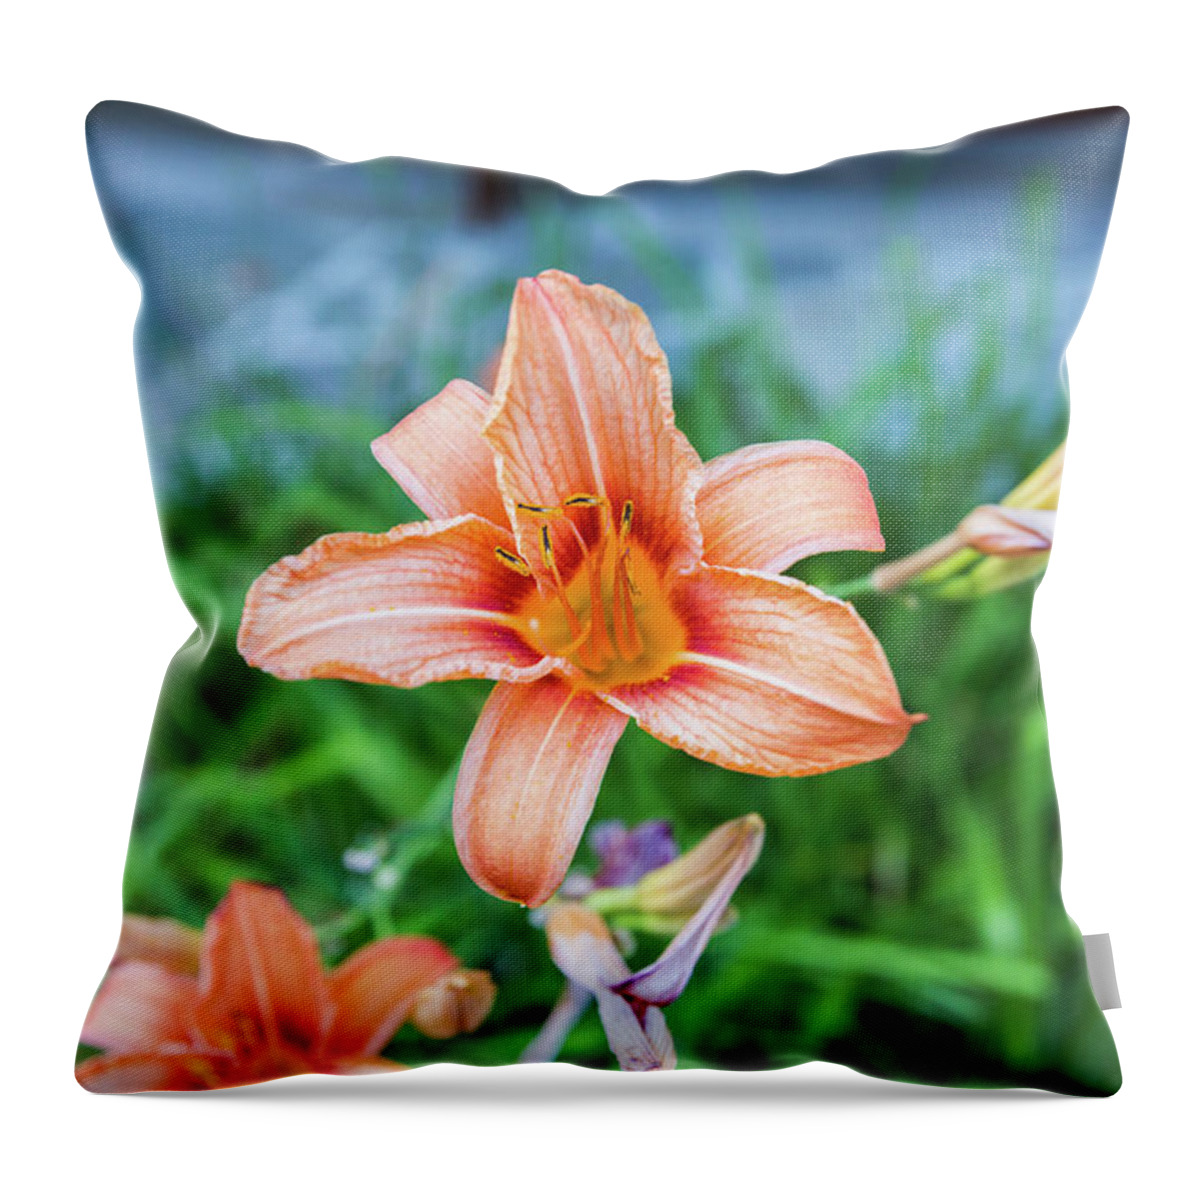 Flower Throw Pillow featuring the photograph Orange Daylily by D K Wall